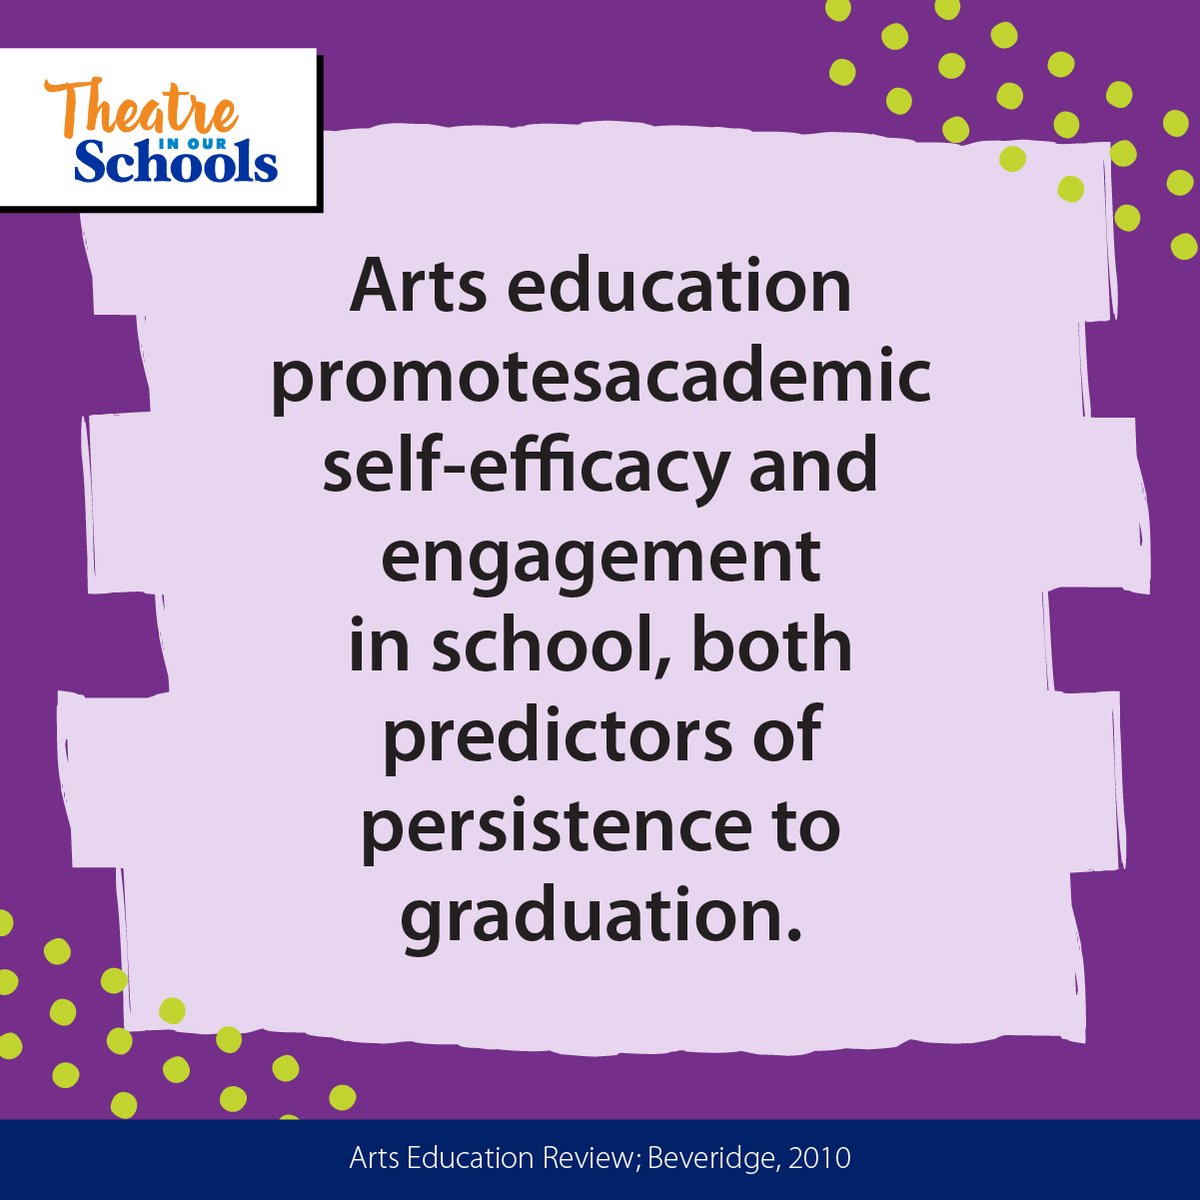 In our theatre programs and on our stage, we already know this is true. Let's remind our communities and administrators too! #TheatreInOurSchools #TIOS24